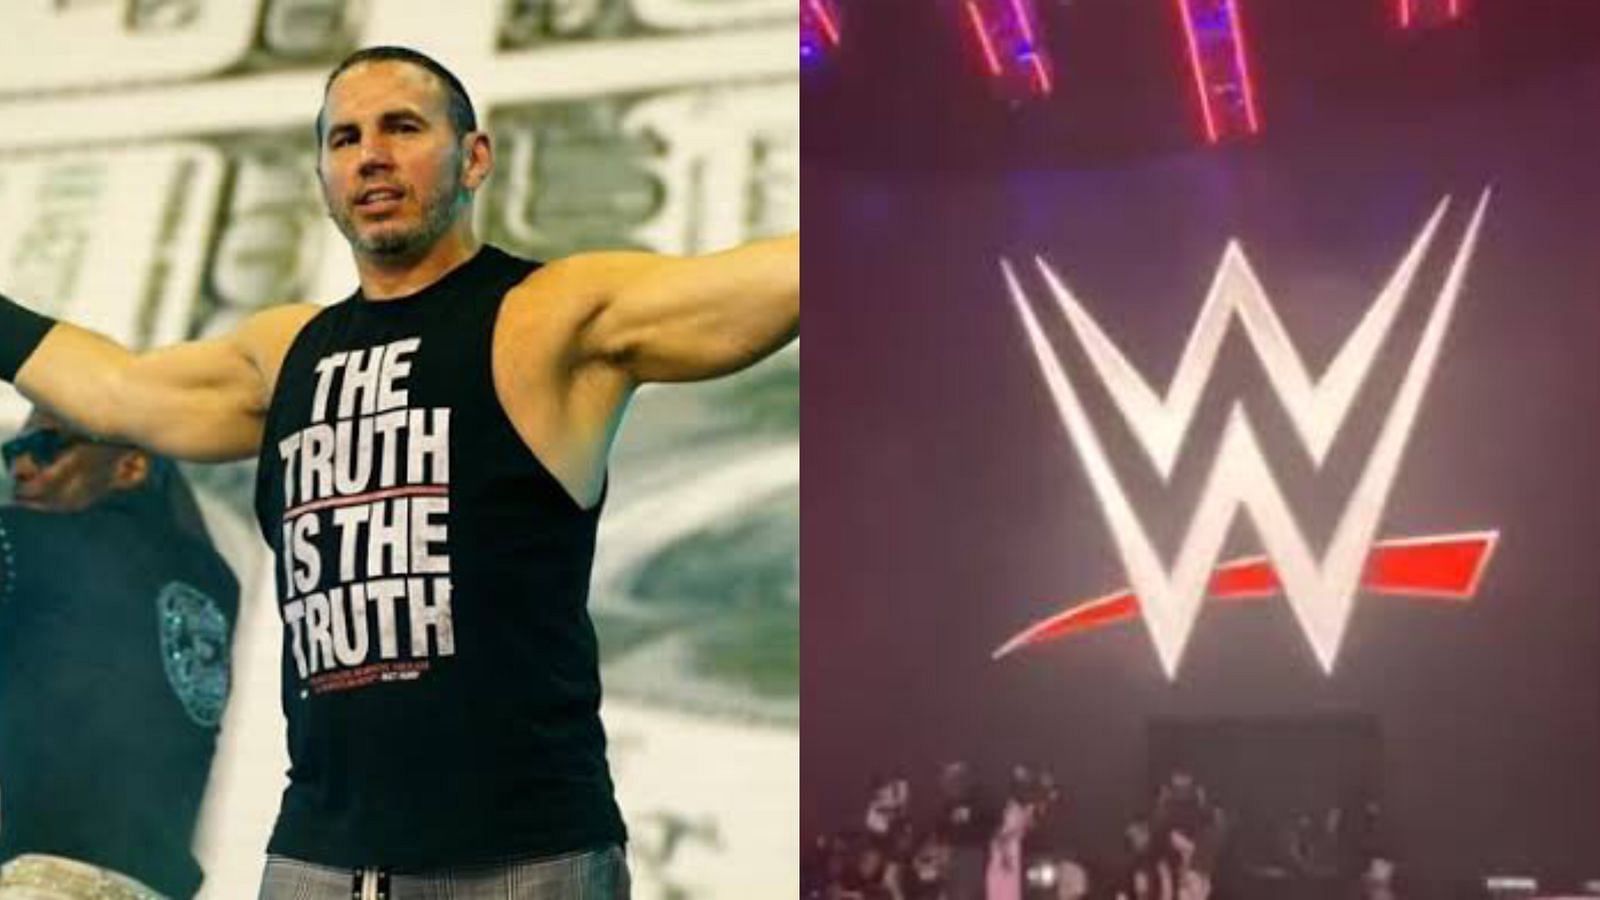  Matt Hardy is currently signed to AEW